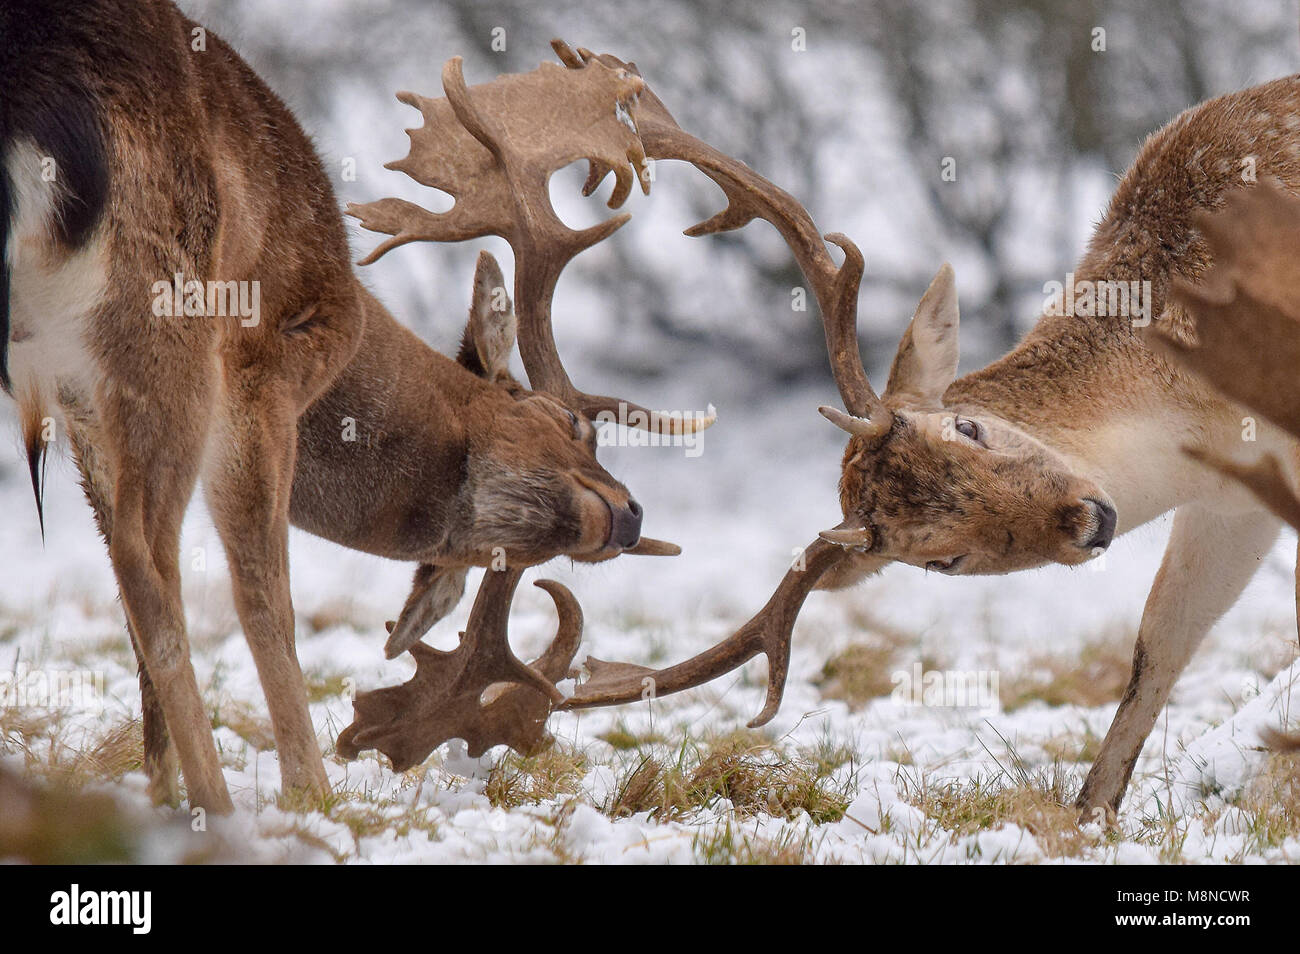 Stags fighting in the snow Stock Photo